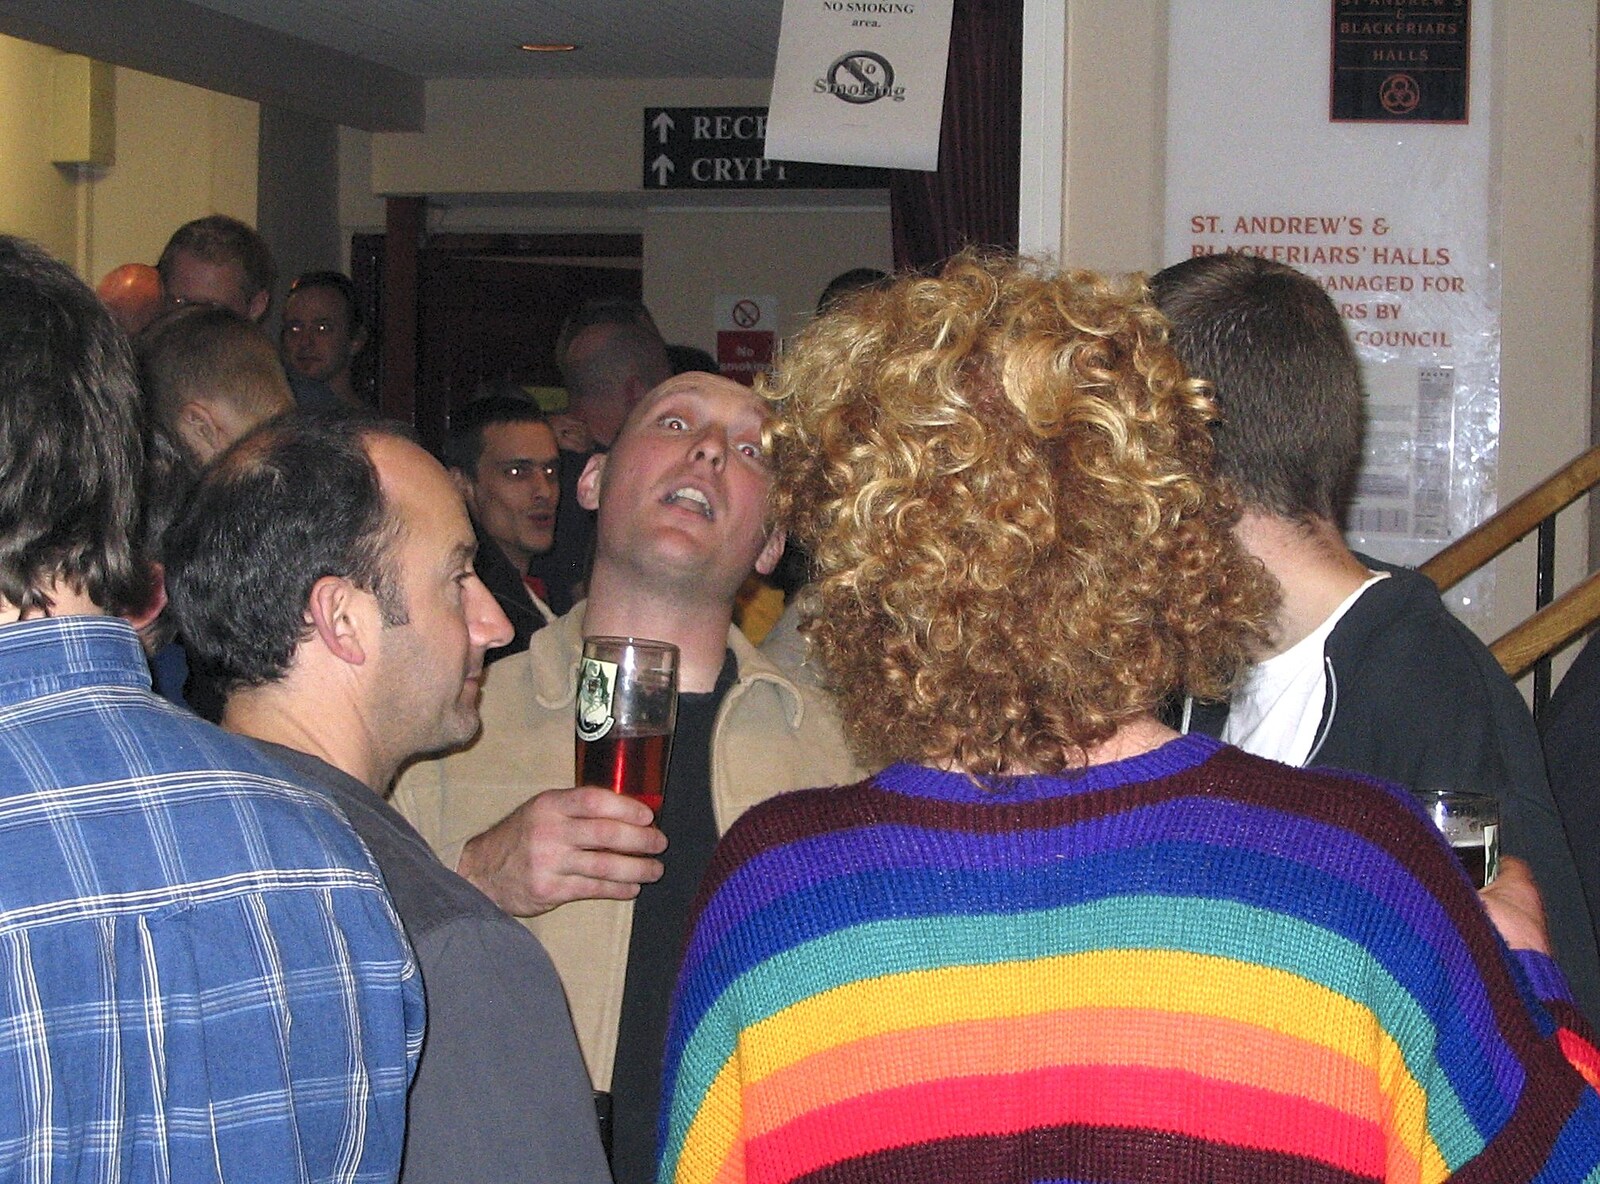 Gov looks over Wavy's rainbow jumper from The Norfolk and Norwich Beer Festival, St. Andrew's Hall, Norwich - 27th October 2004